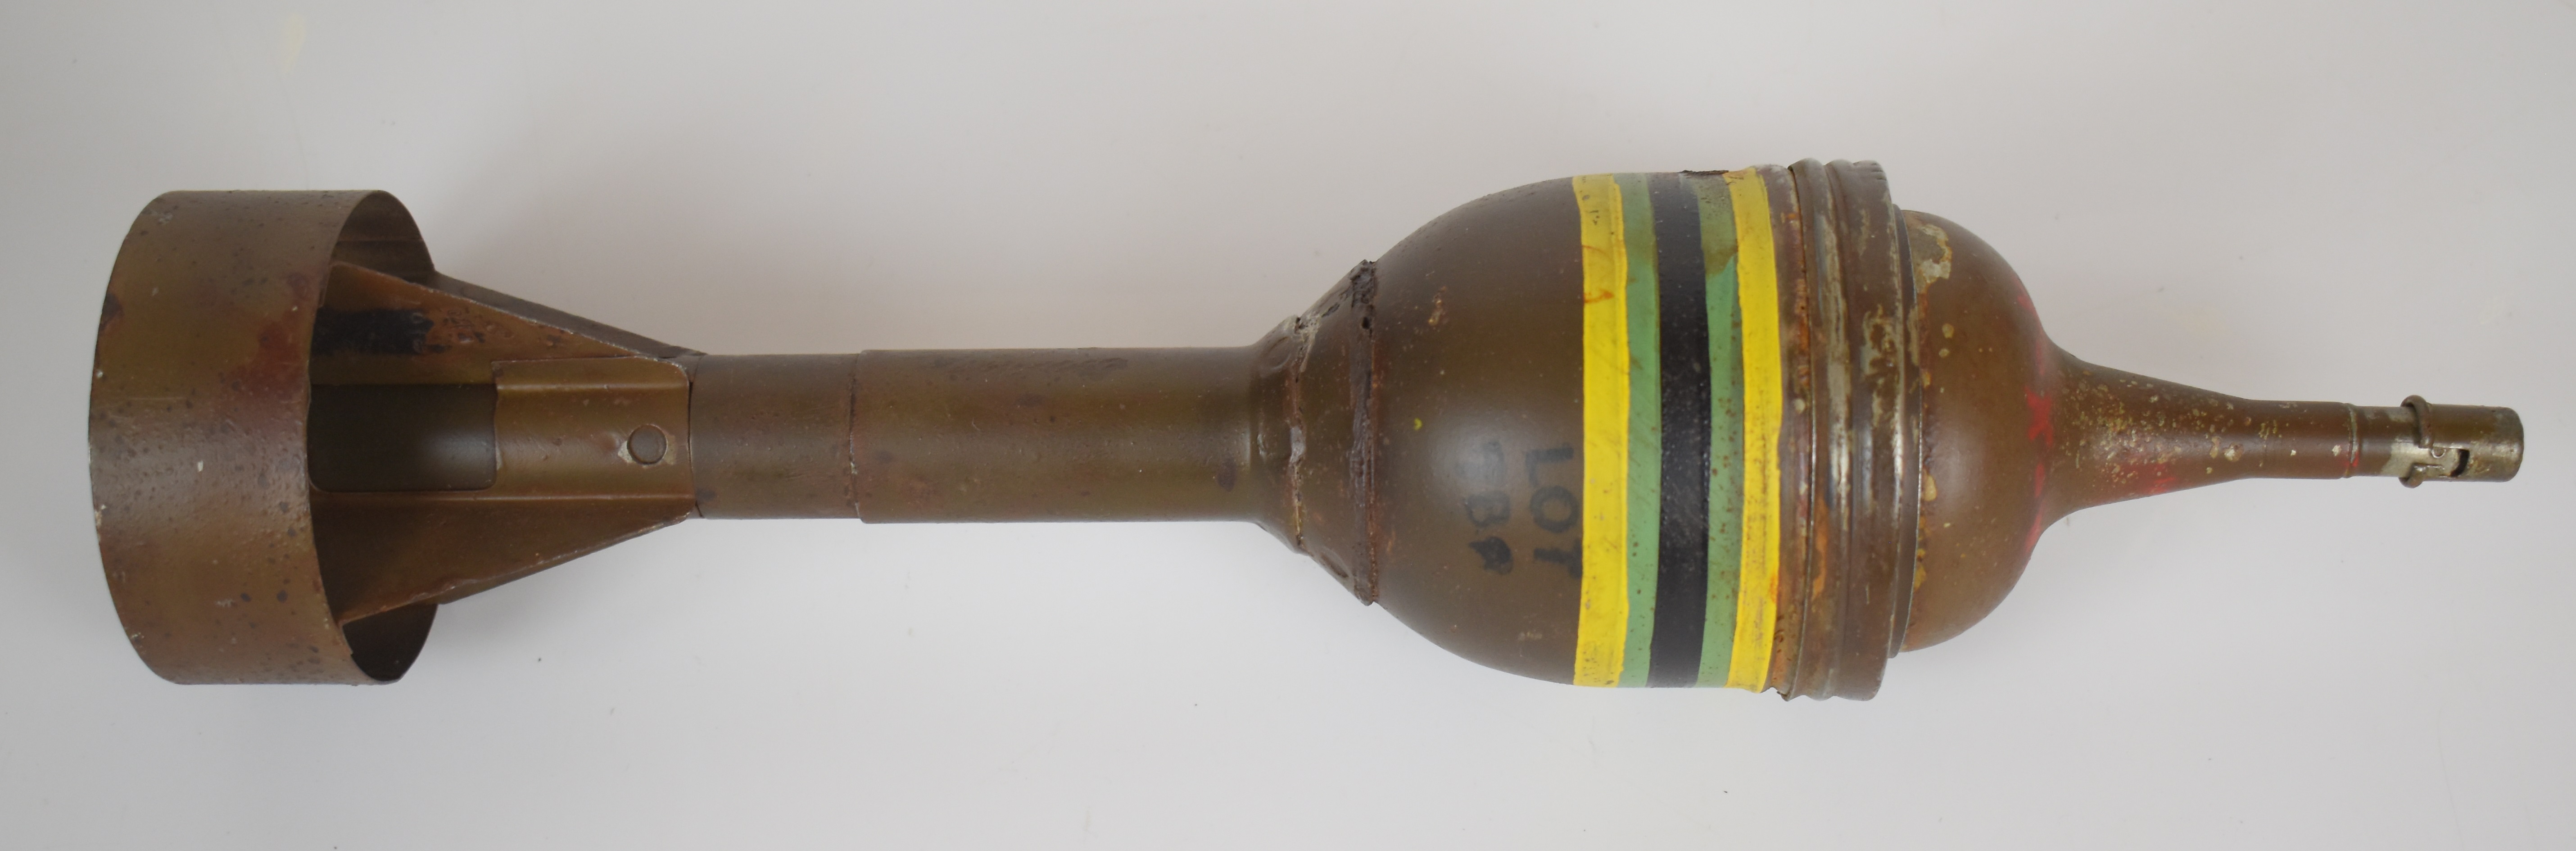 British WW2 PIAT (Projectile Infantry Anti Tank) inert round, ink stamped 3/43 / LOT 78 - Image 4 of 4